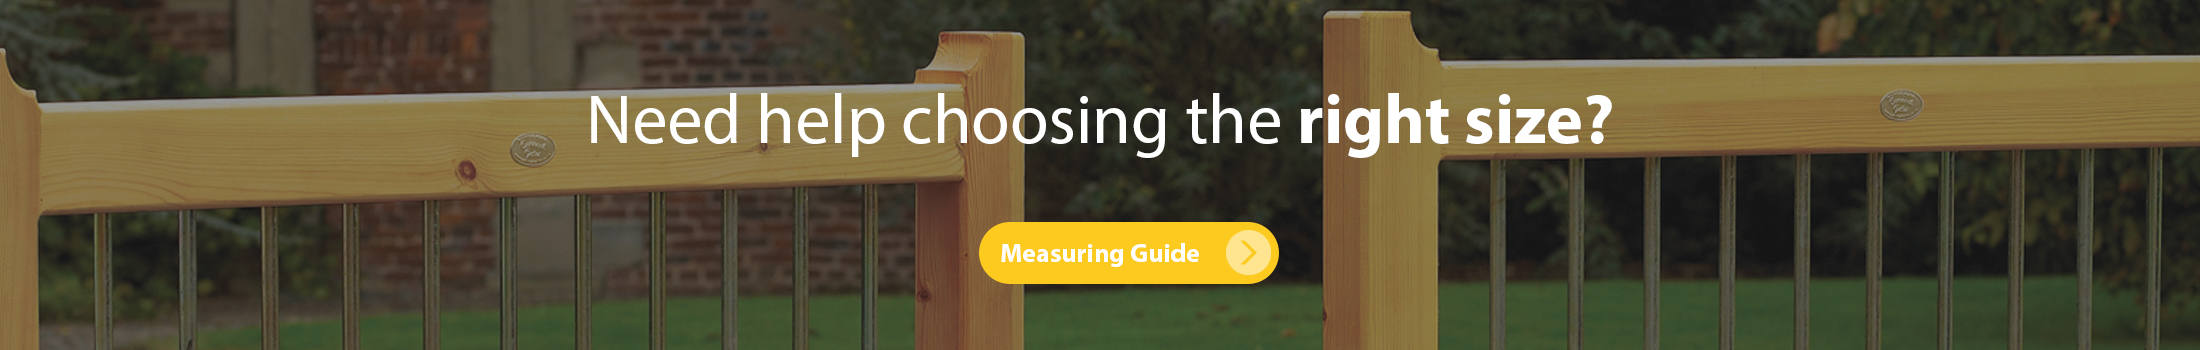 View the measuring guide for help with sizes